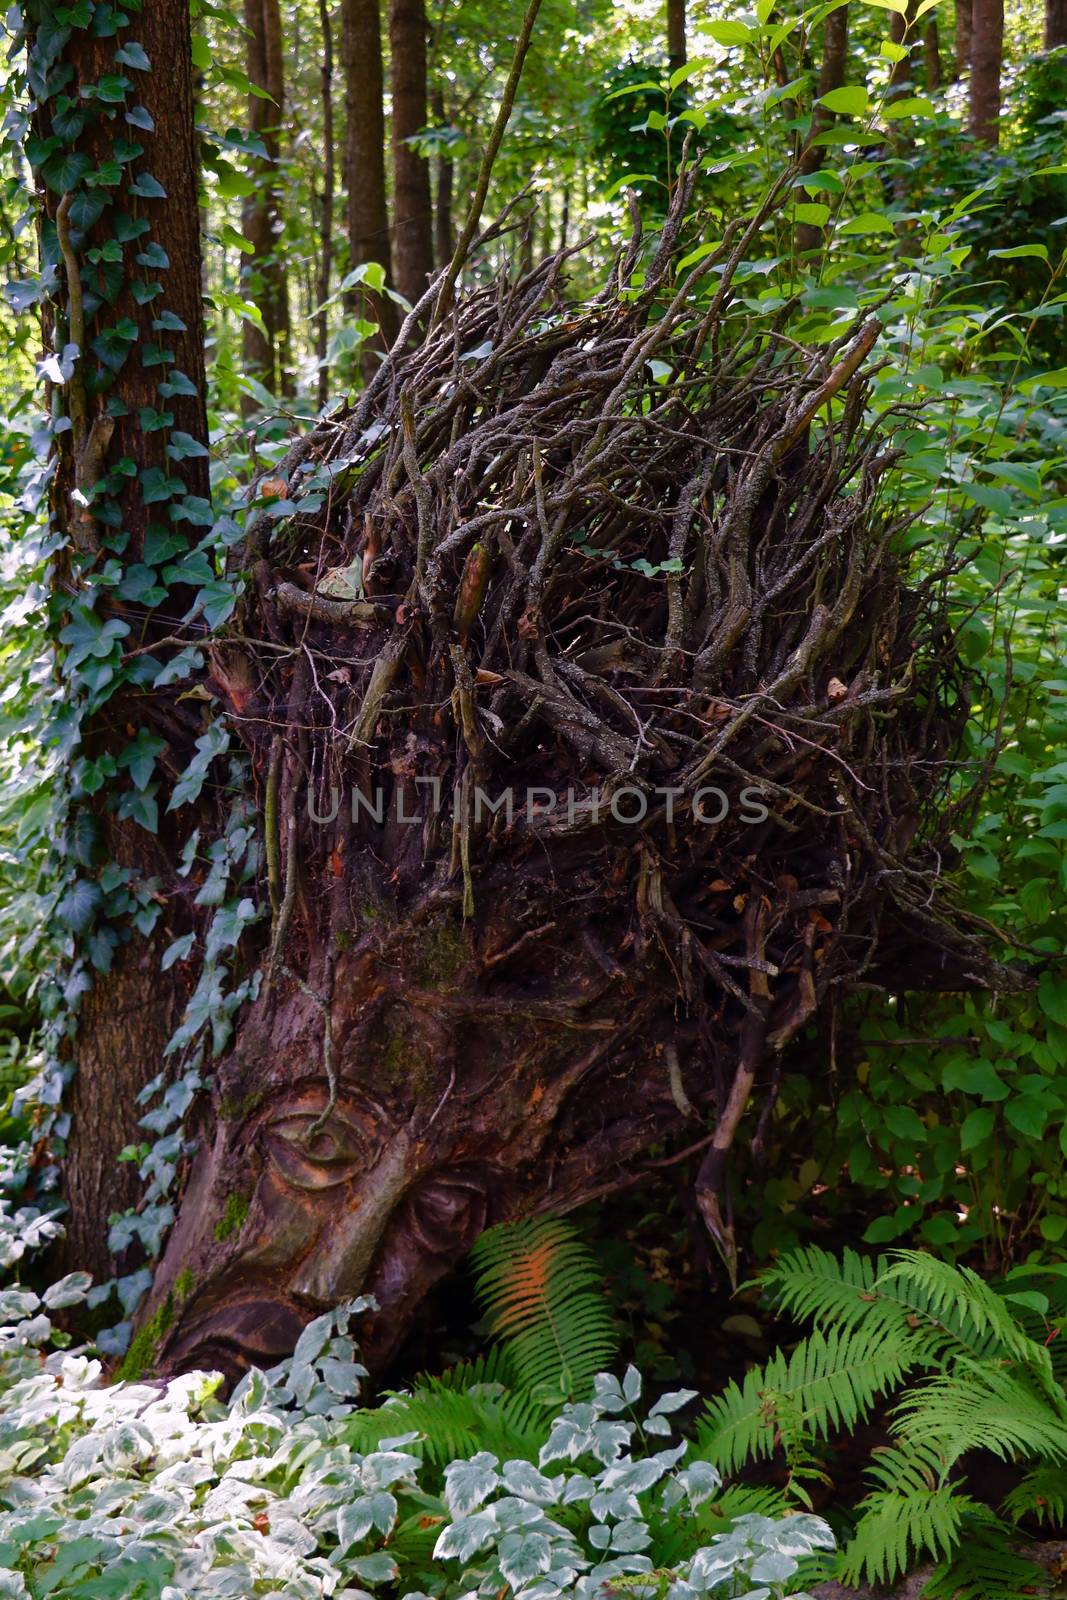 Big roots of an old green tree in a forest